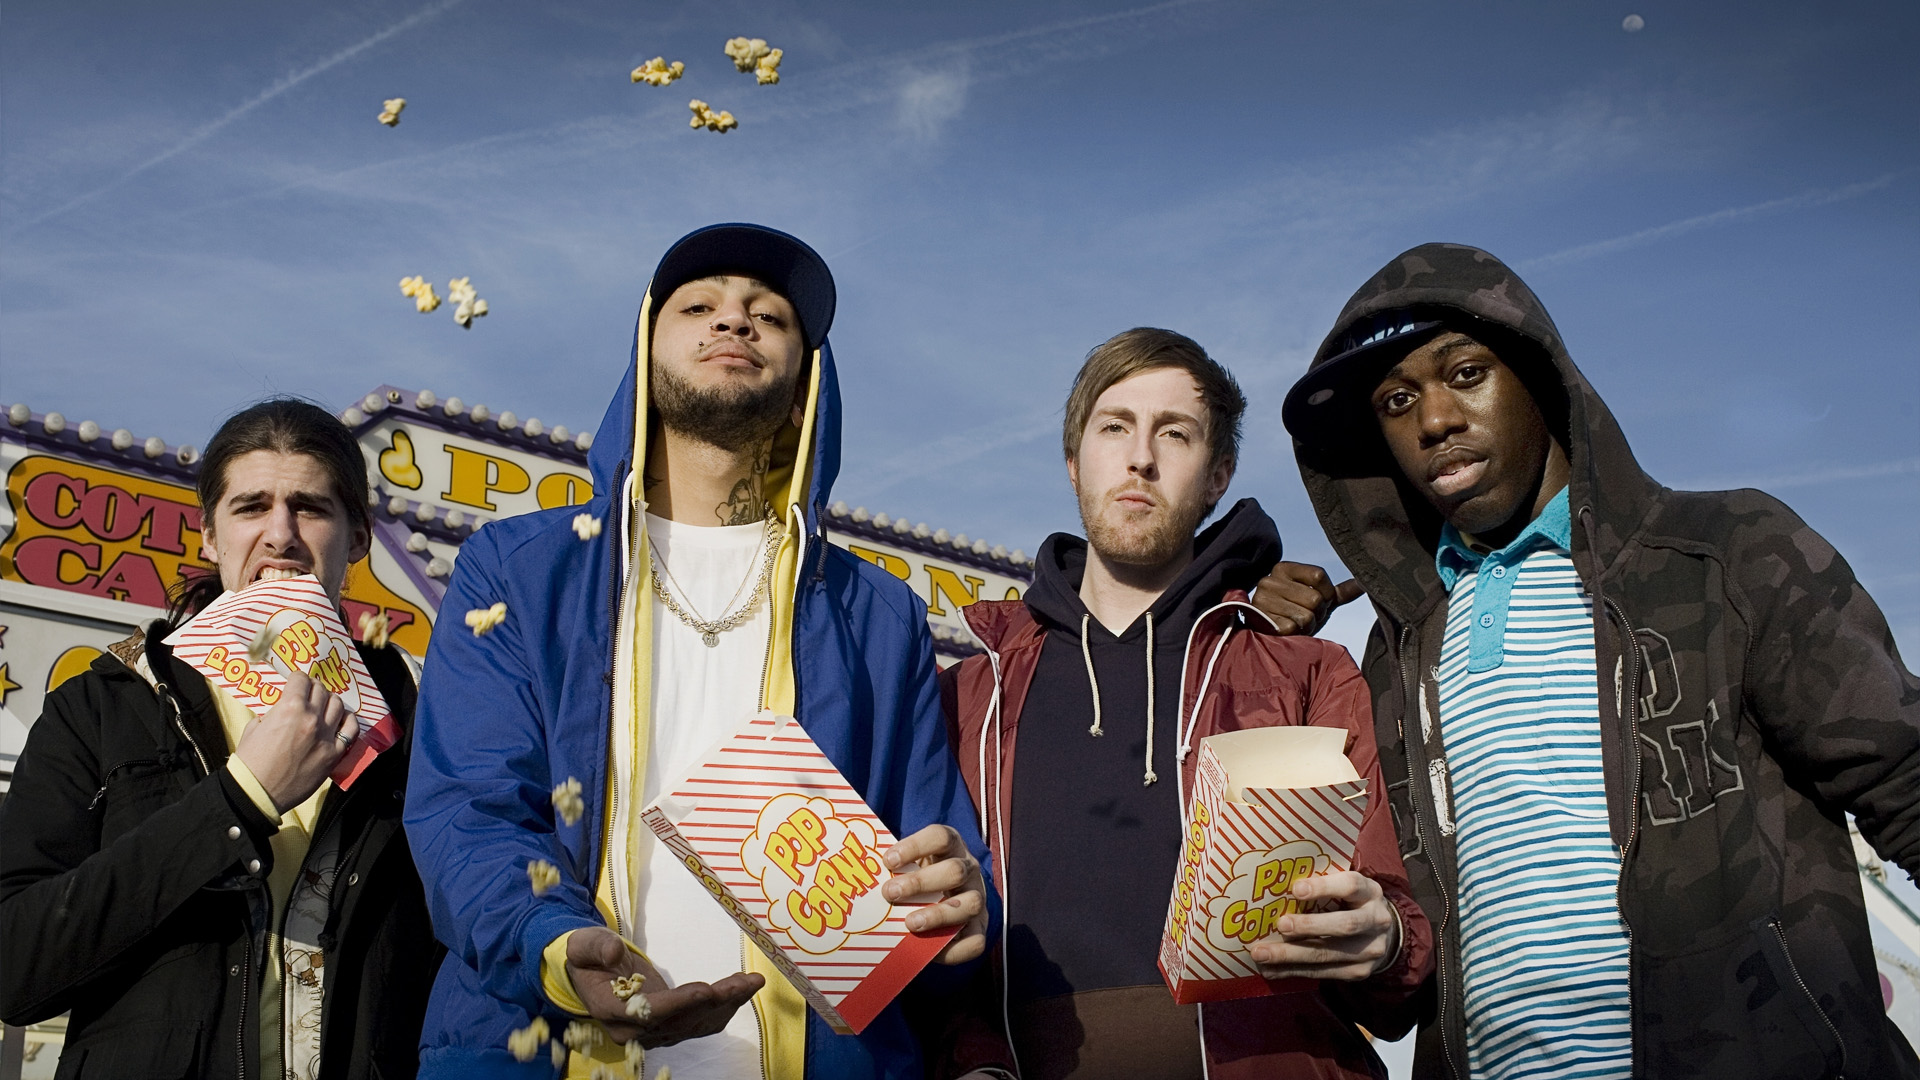 It looks like Gym Class Heroes are getting back together